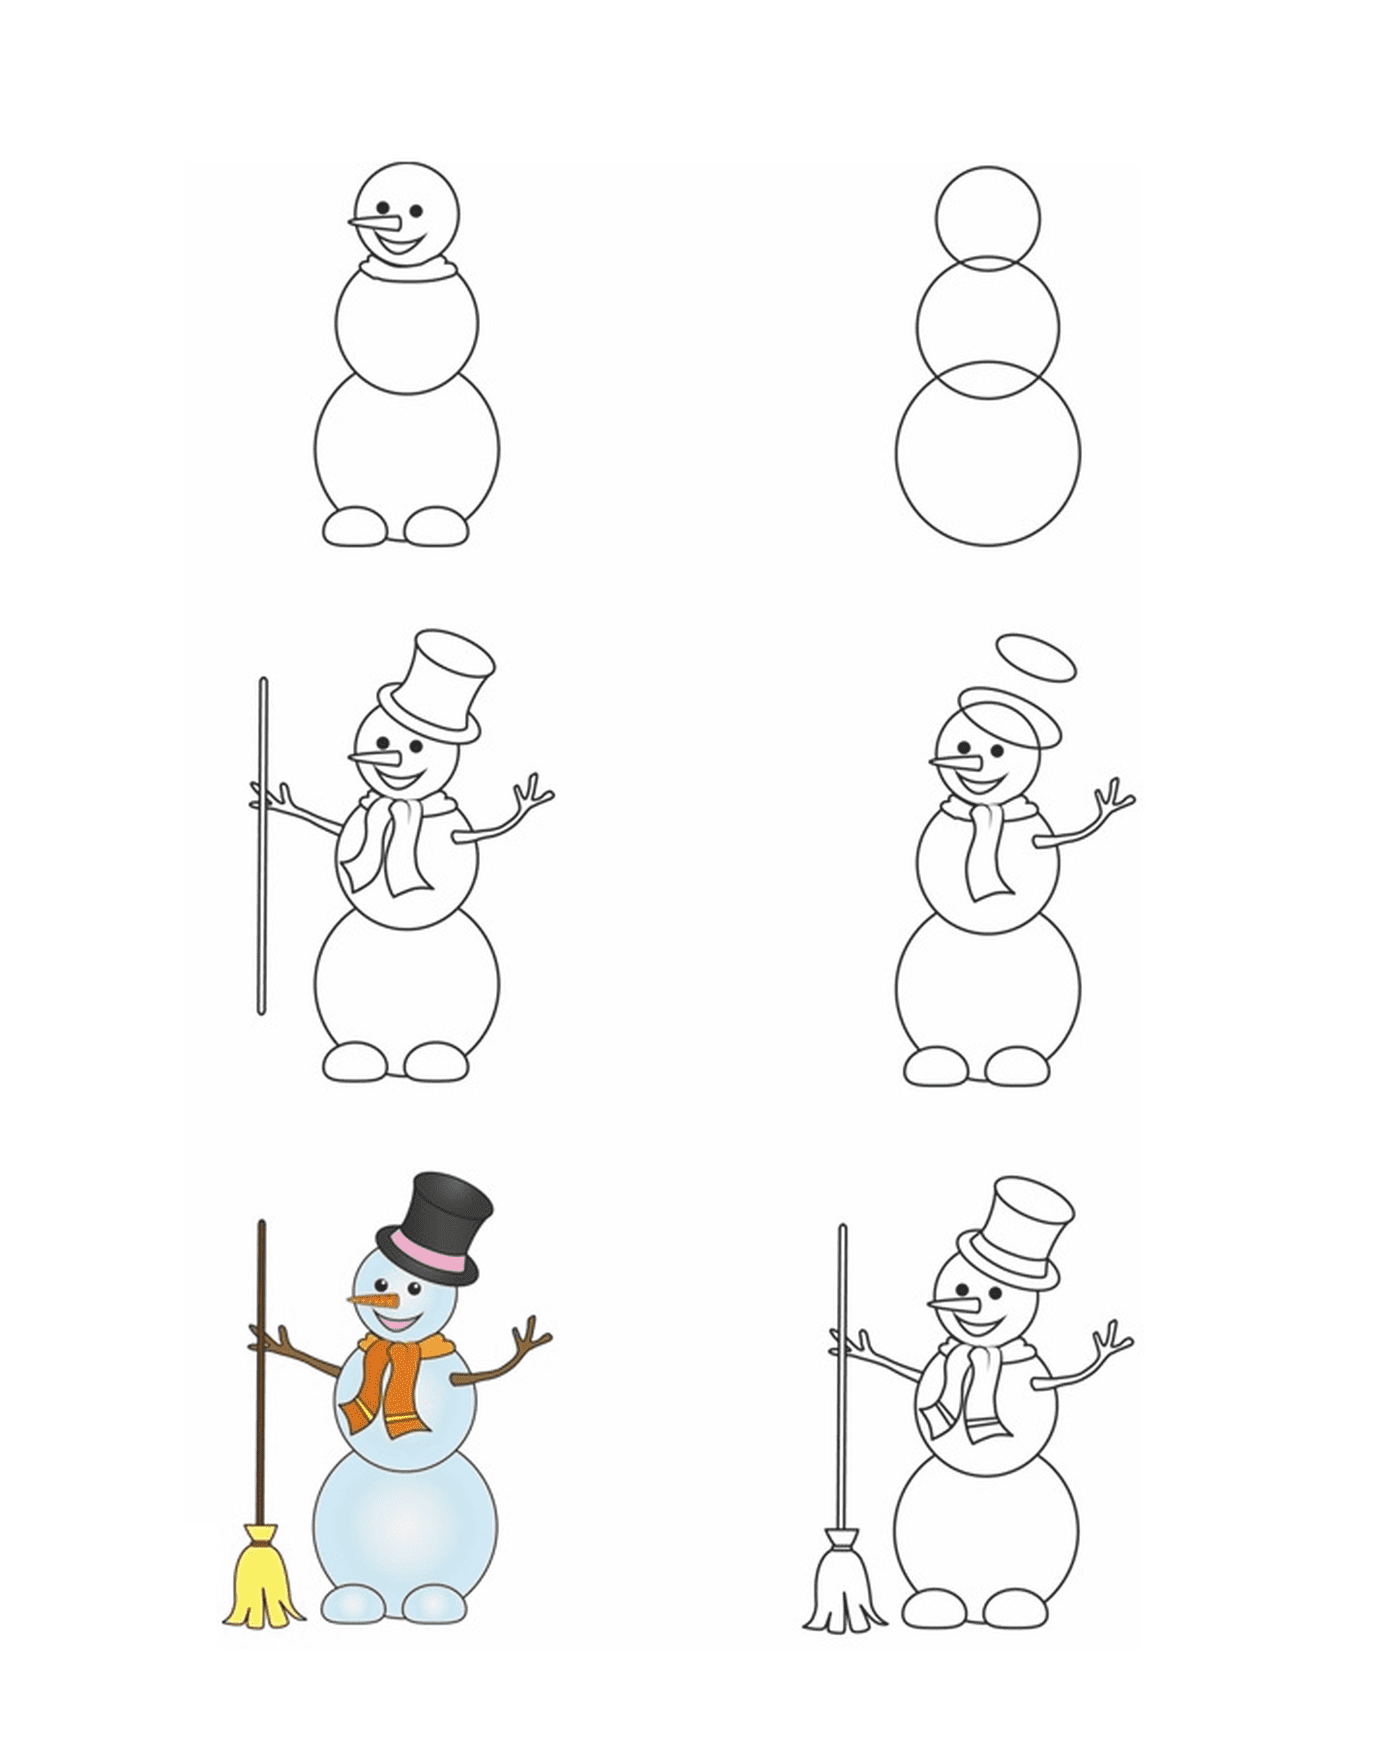  How to draw a snowman step by step 